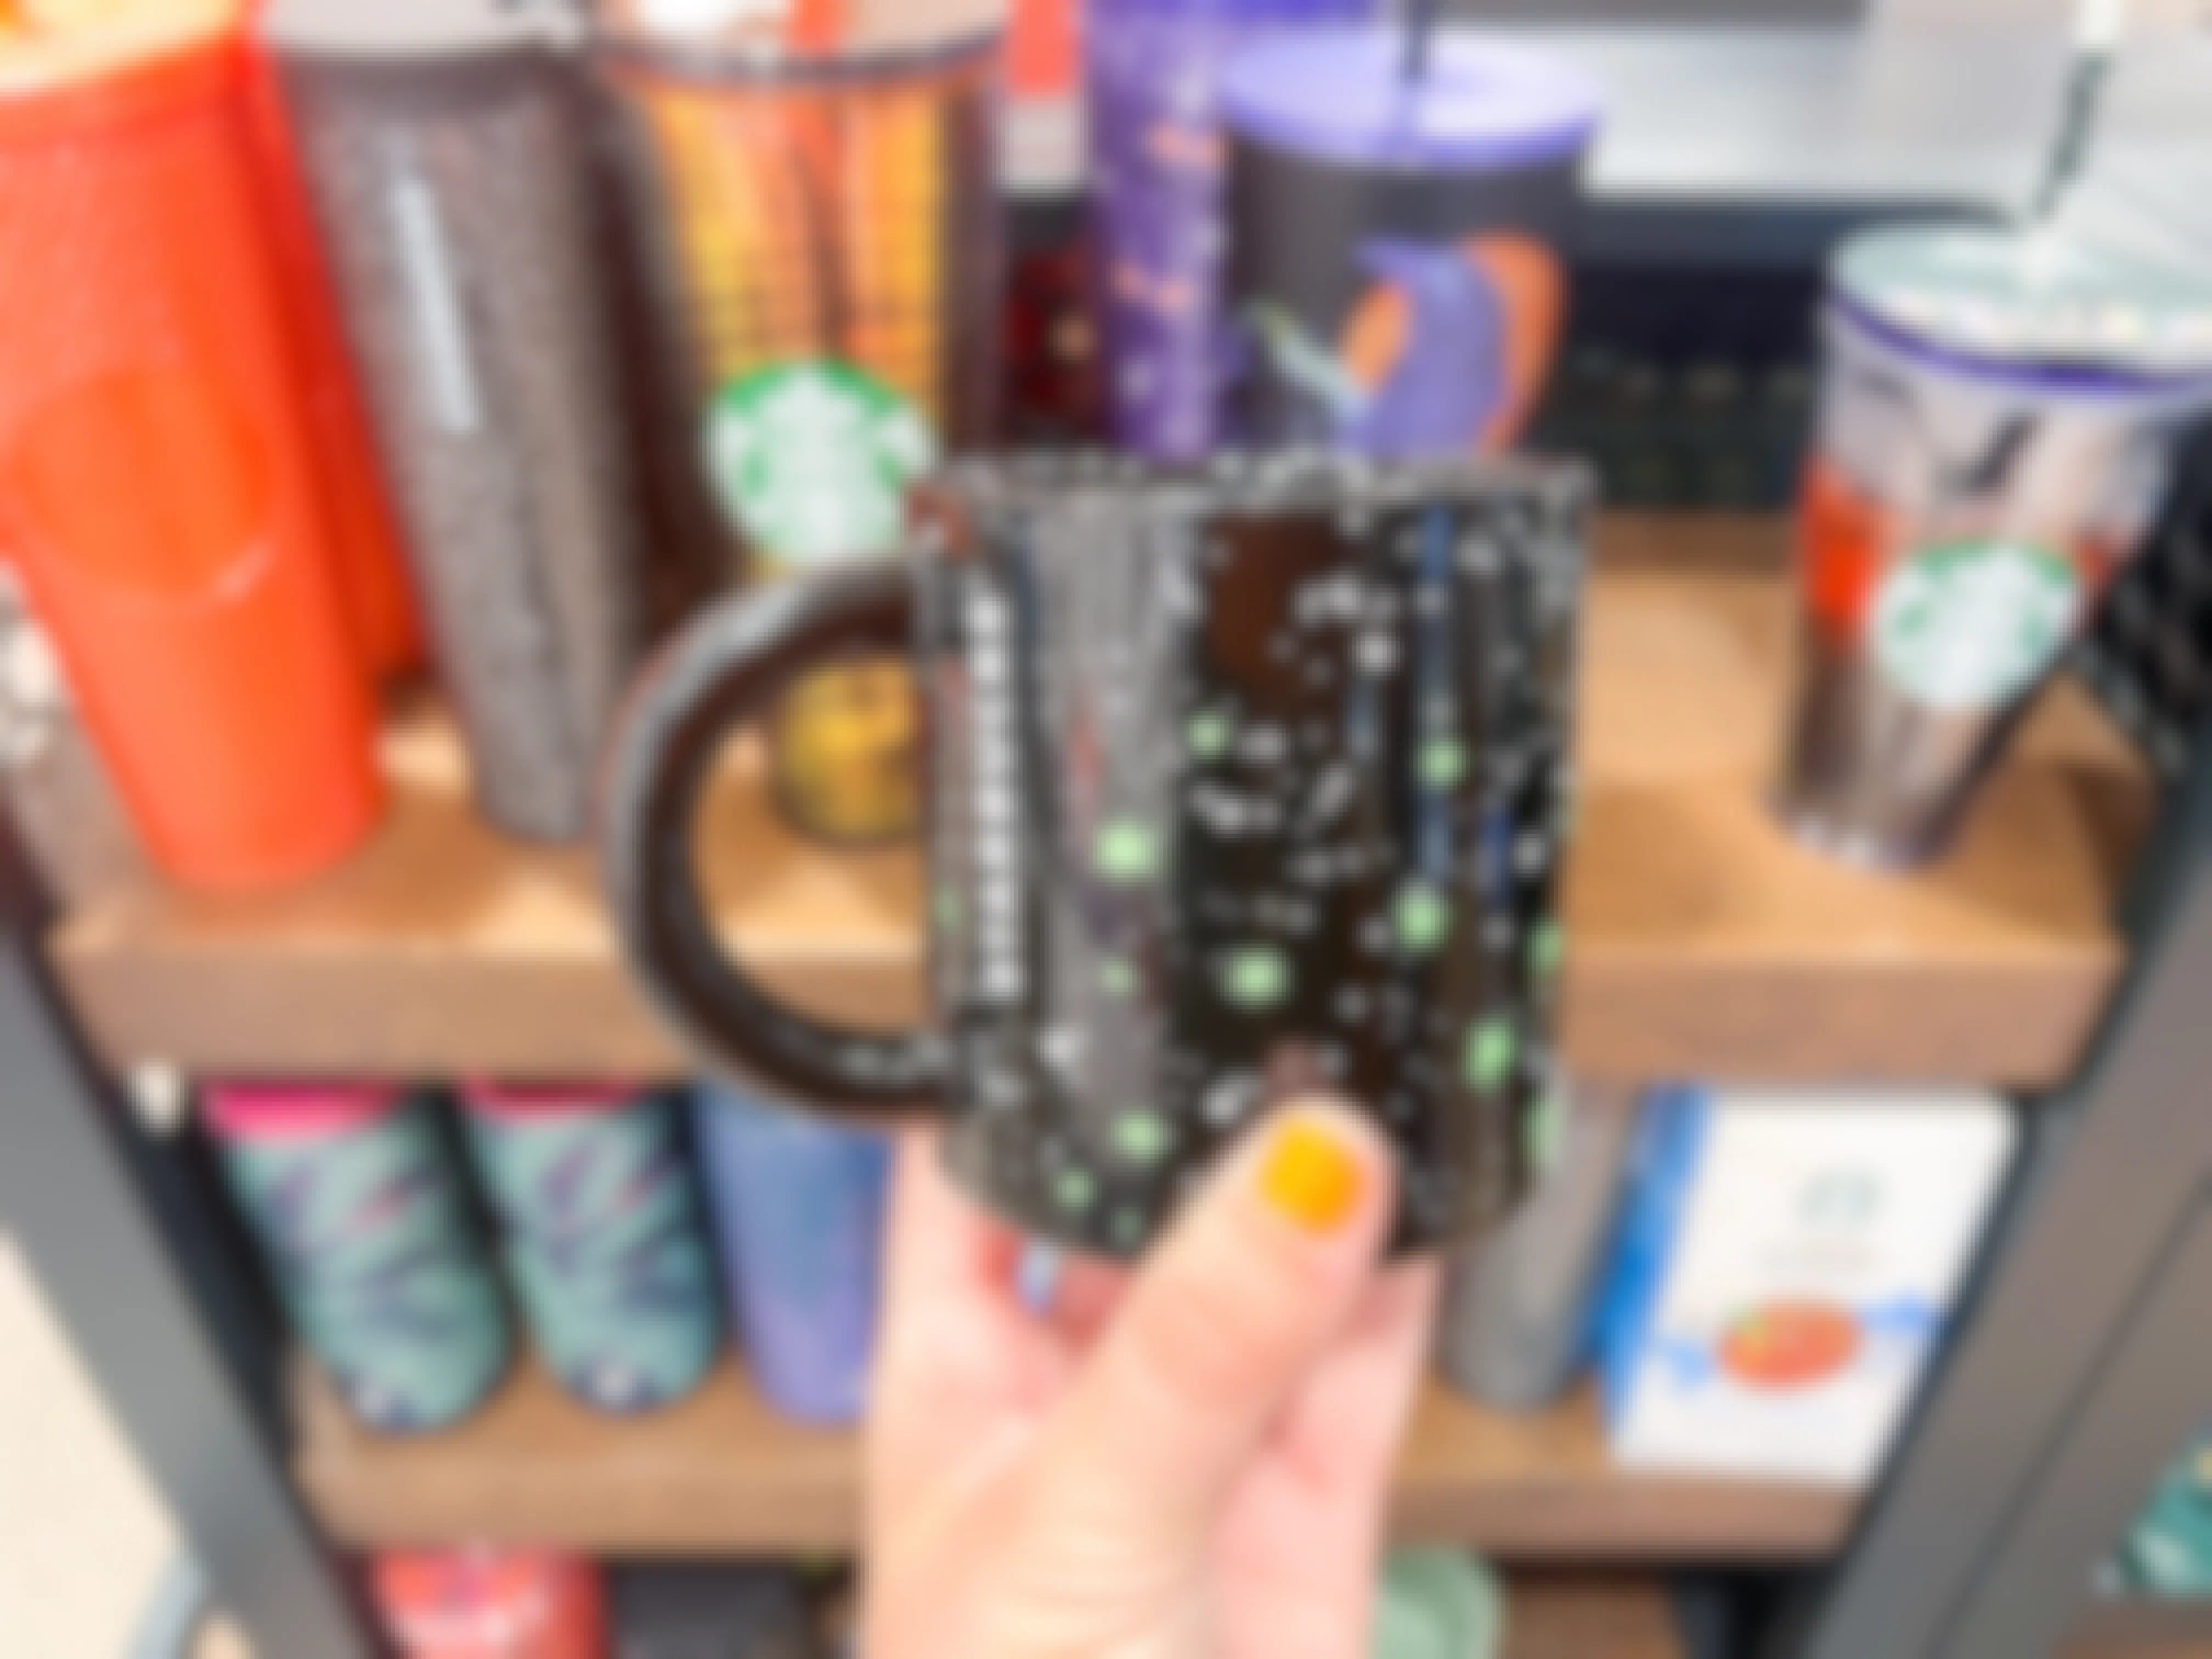 A person holding up a Starbucks mug in front of a shelf.